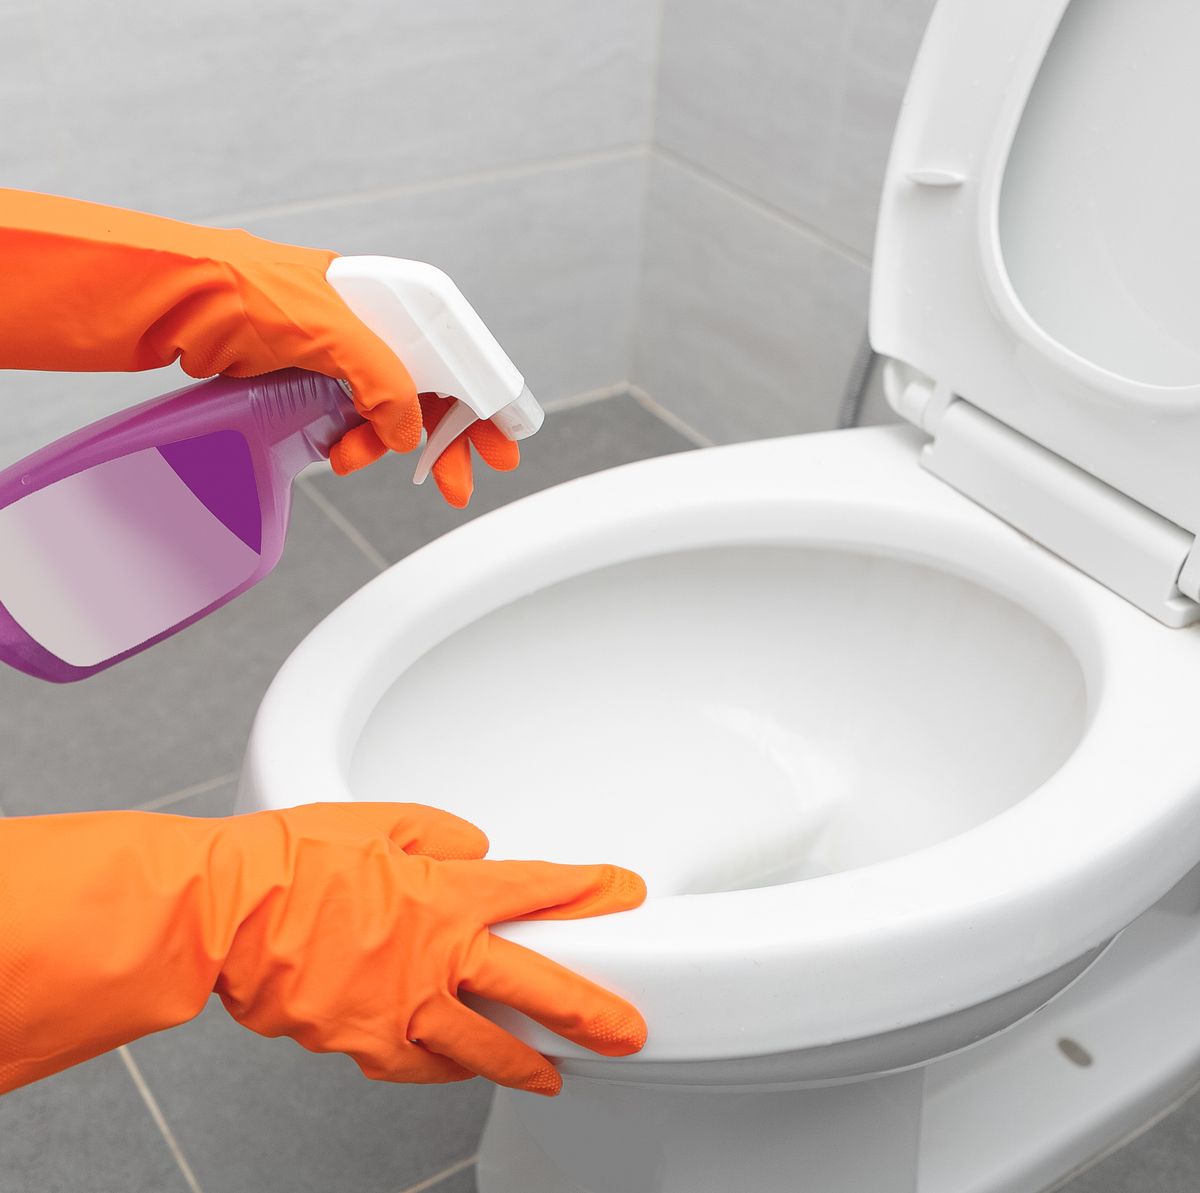 How to Clean a Toilet – Expert Tips For Toilet Cleaning